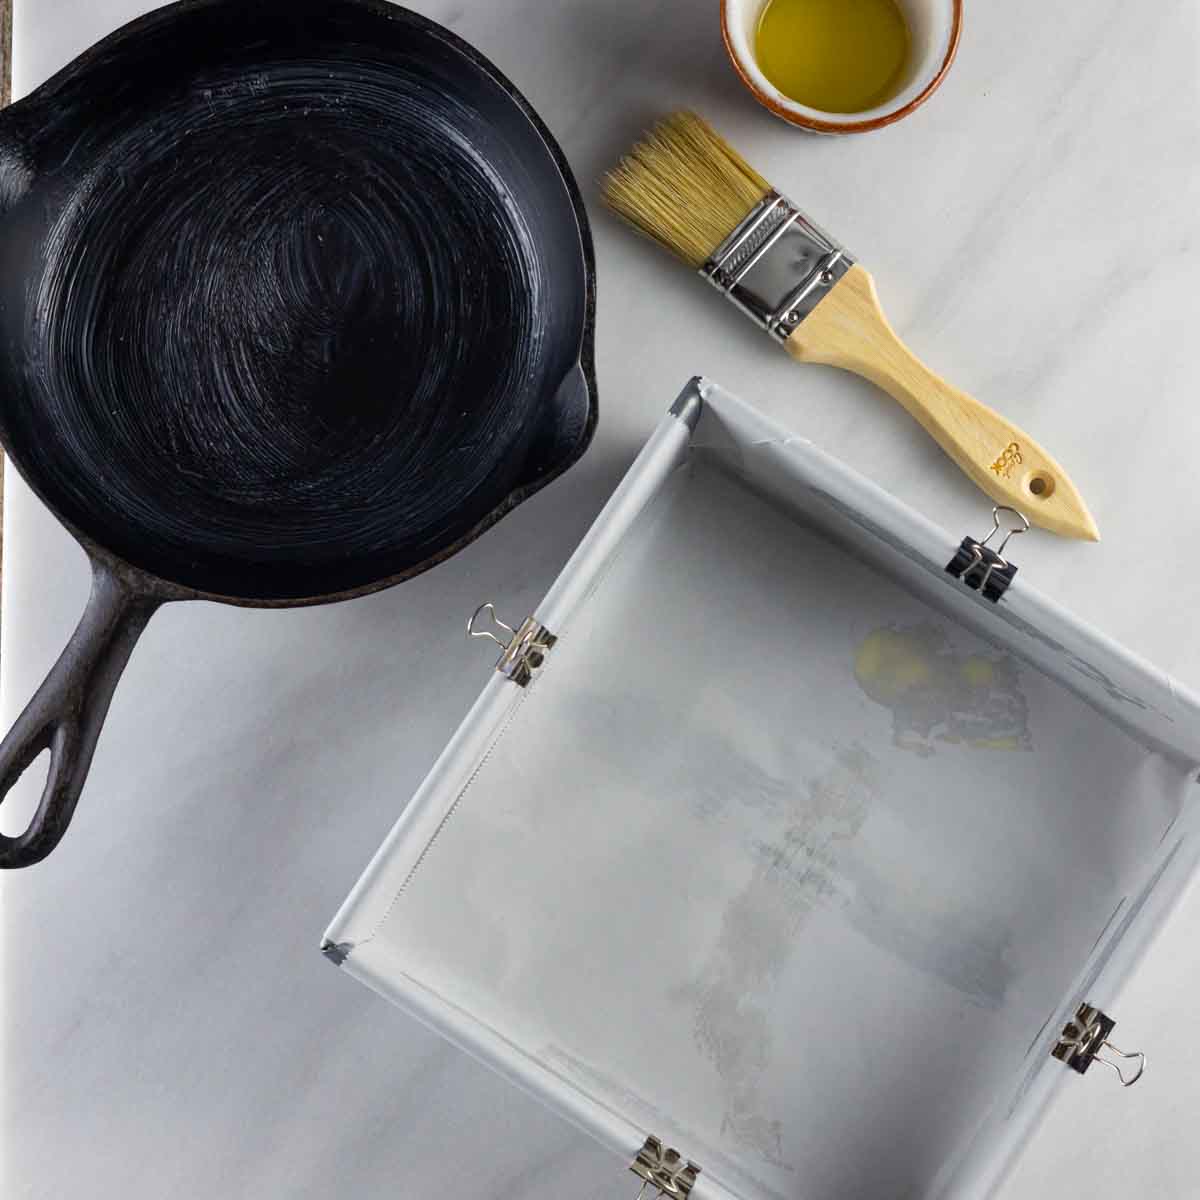 Oiled cast iron skillet, and square baking pan lined with parchment.